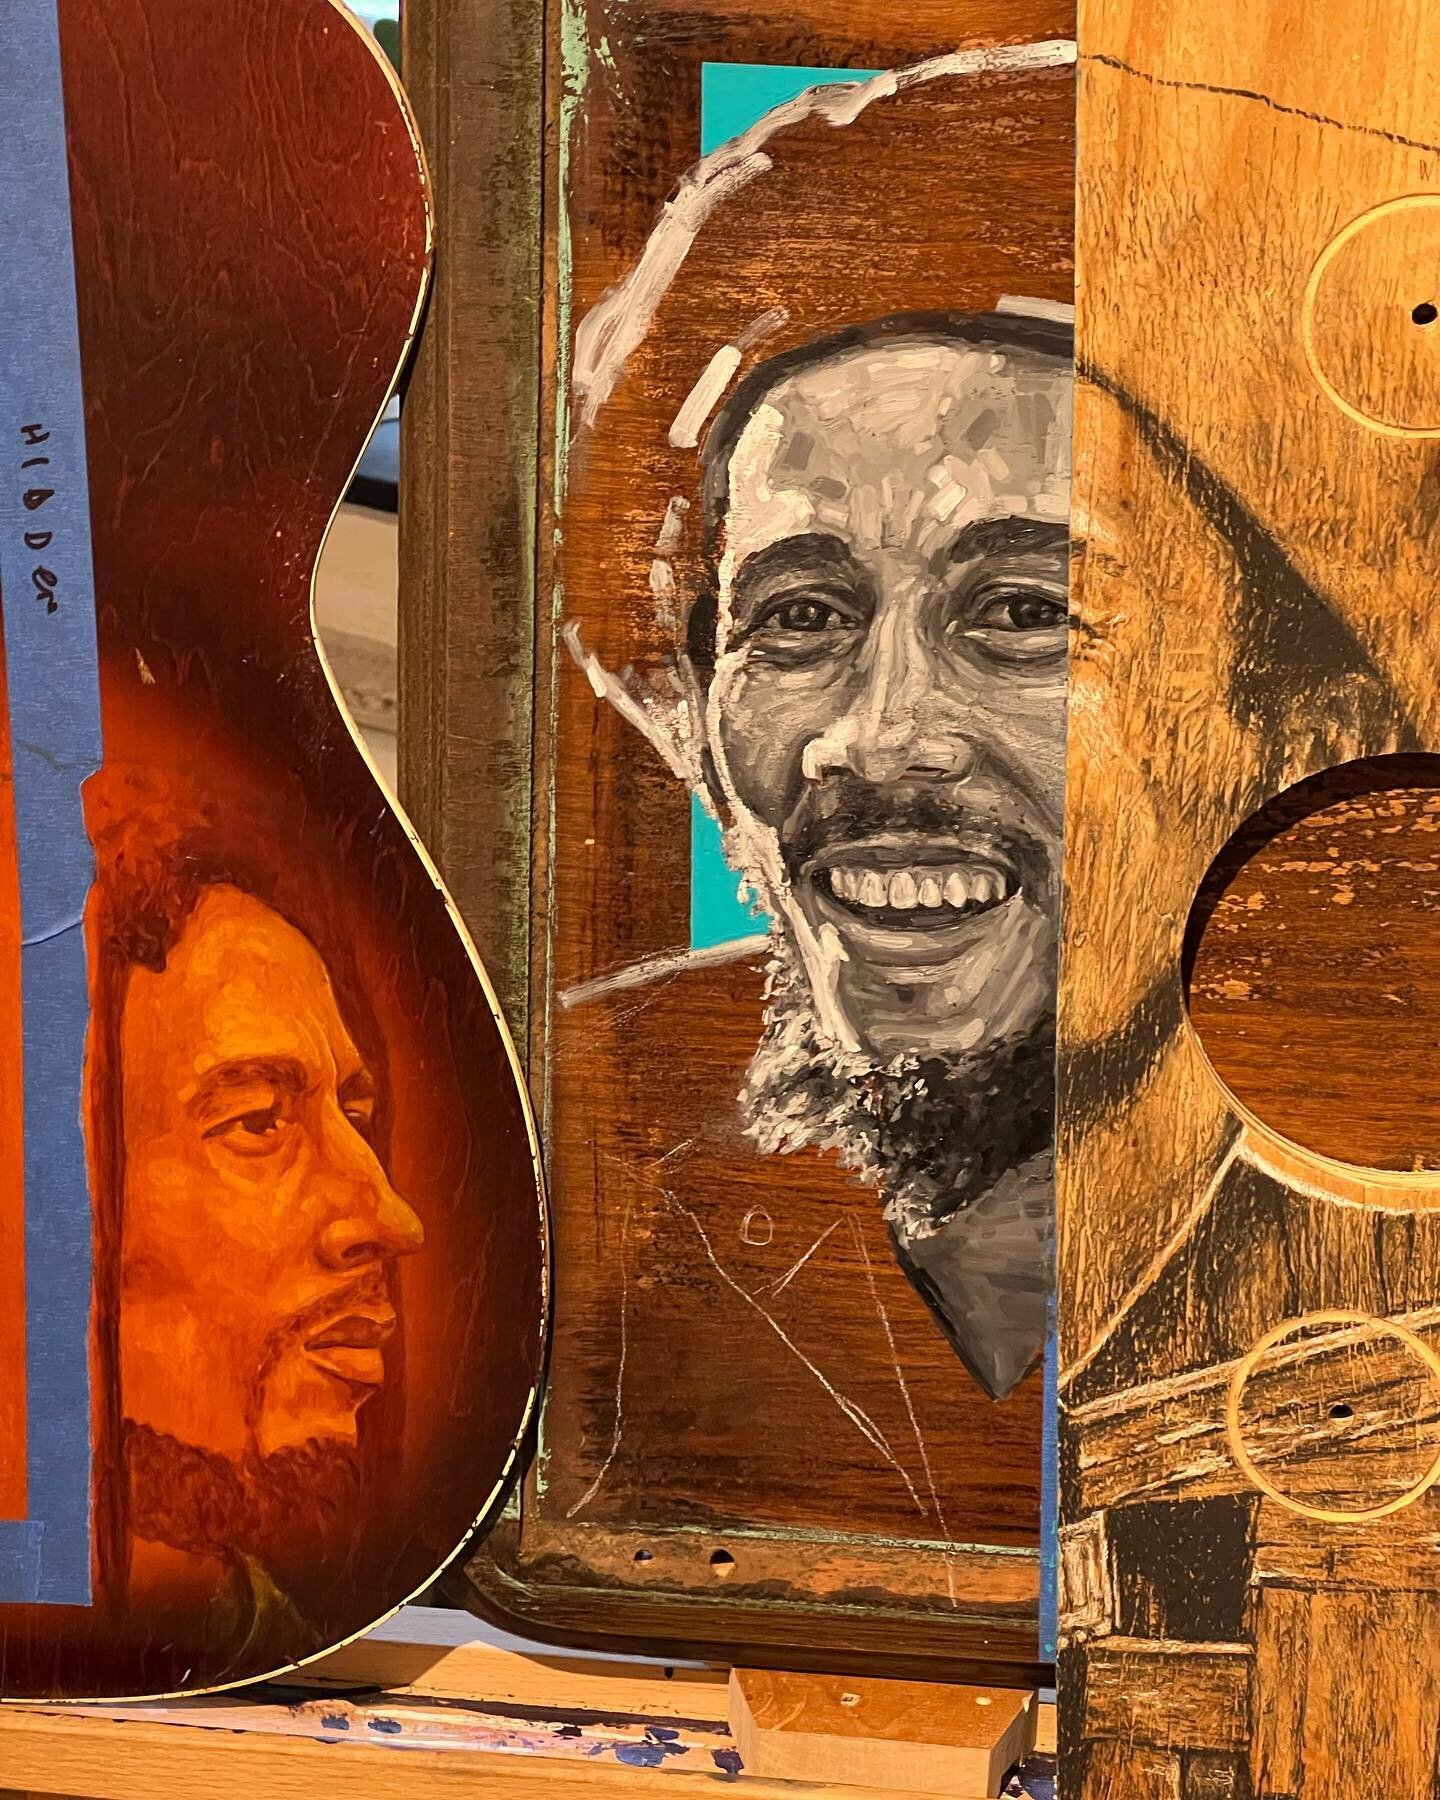 pieces of bob are coming together&hellip; slow and steady. #bobmarley #oilpaint #charcoal #guitar #art #artist #painting #assemblage #portrait #mixedmedia #pattern #vintage #wood #recycledart #collage #rochester